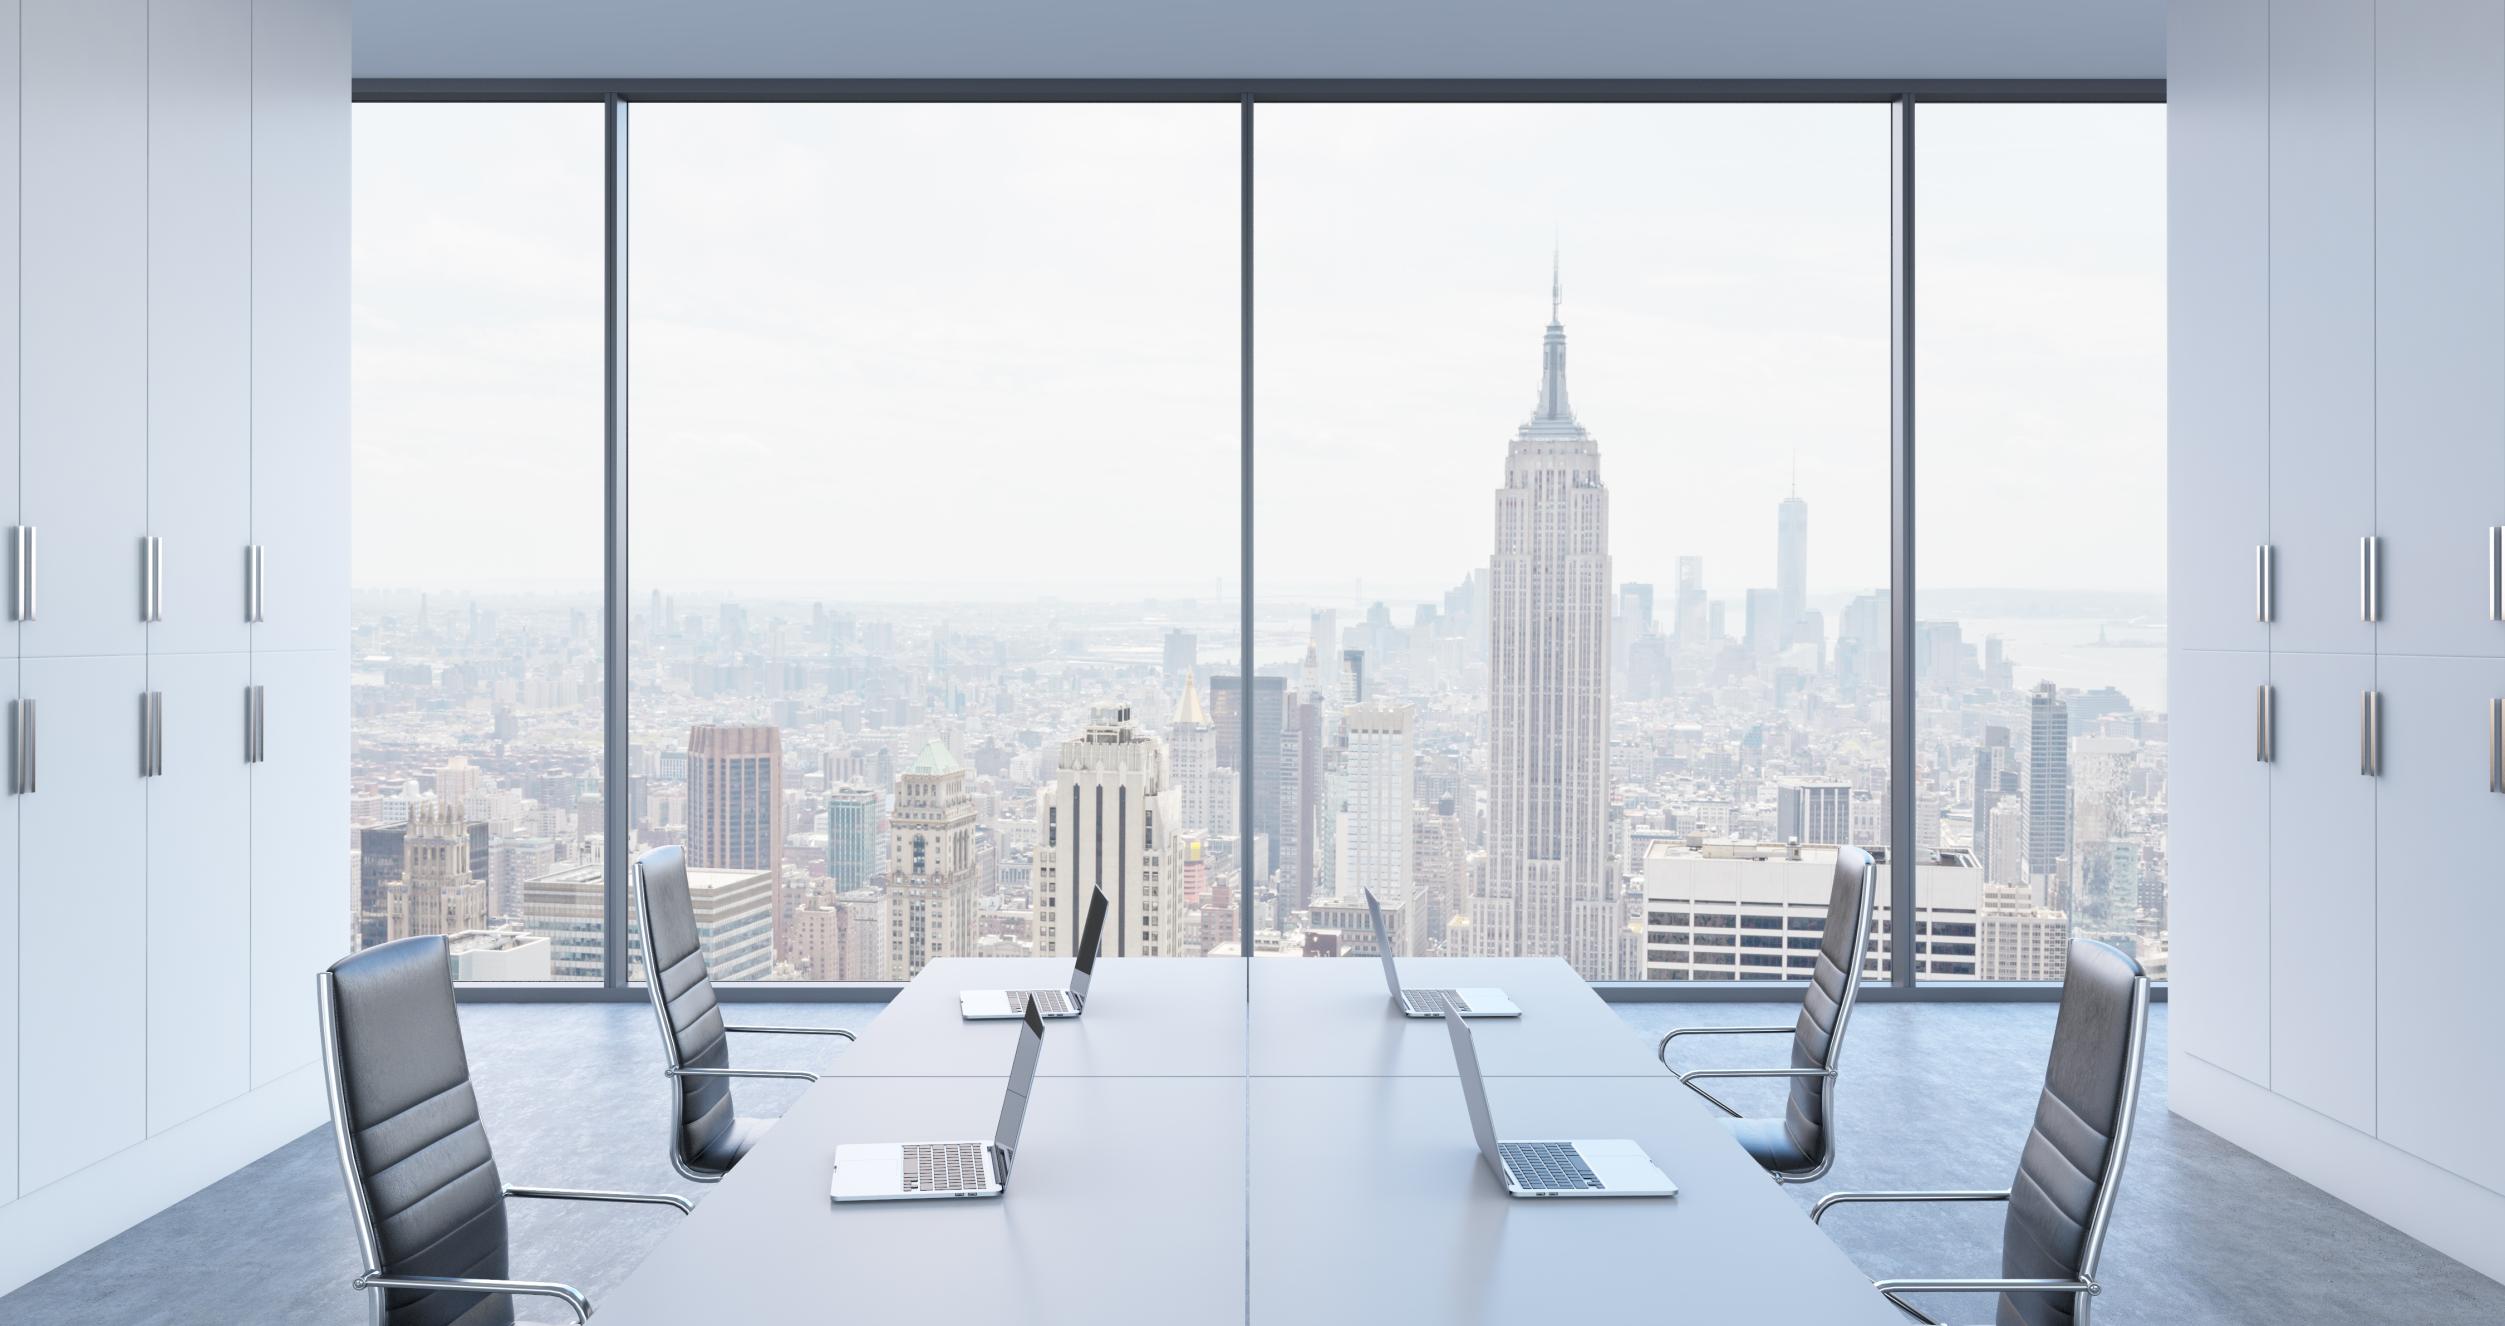 A conference room overlooking the New York City skyline